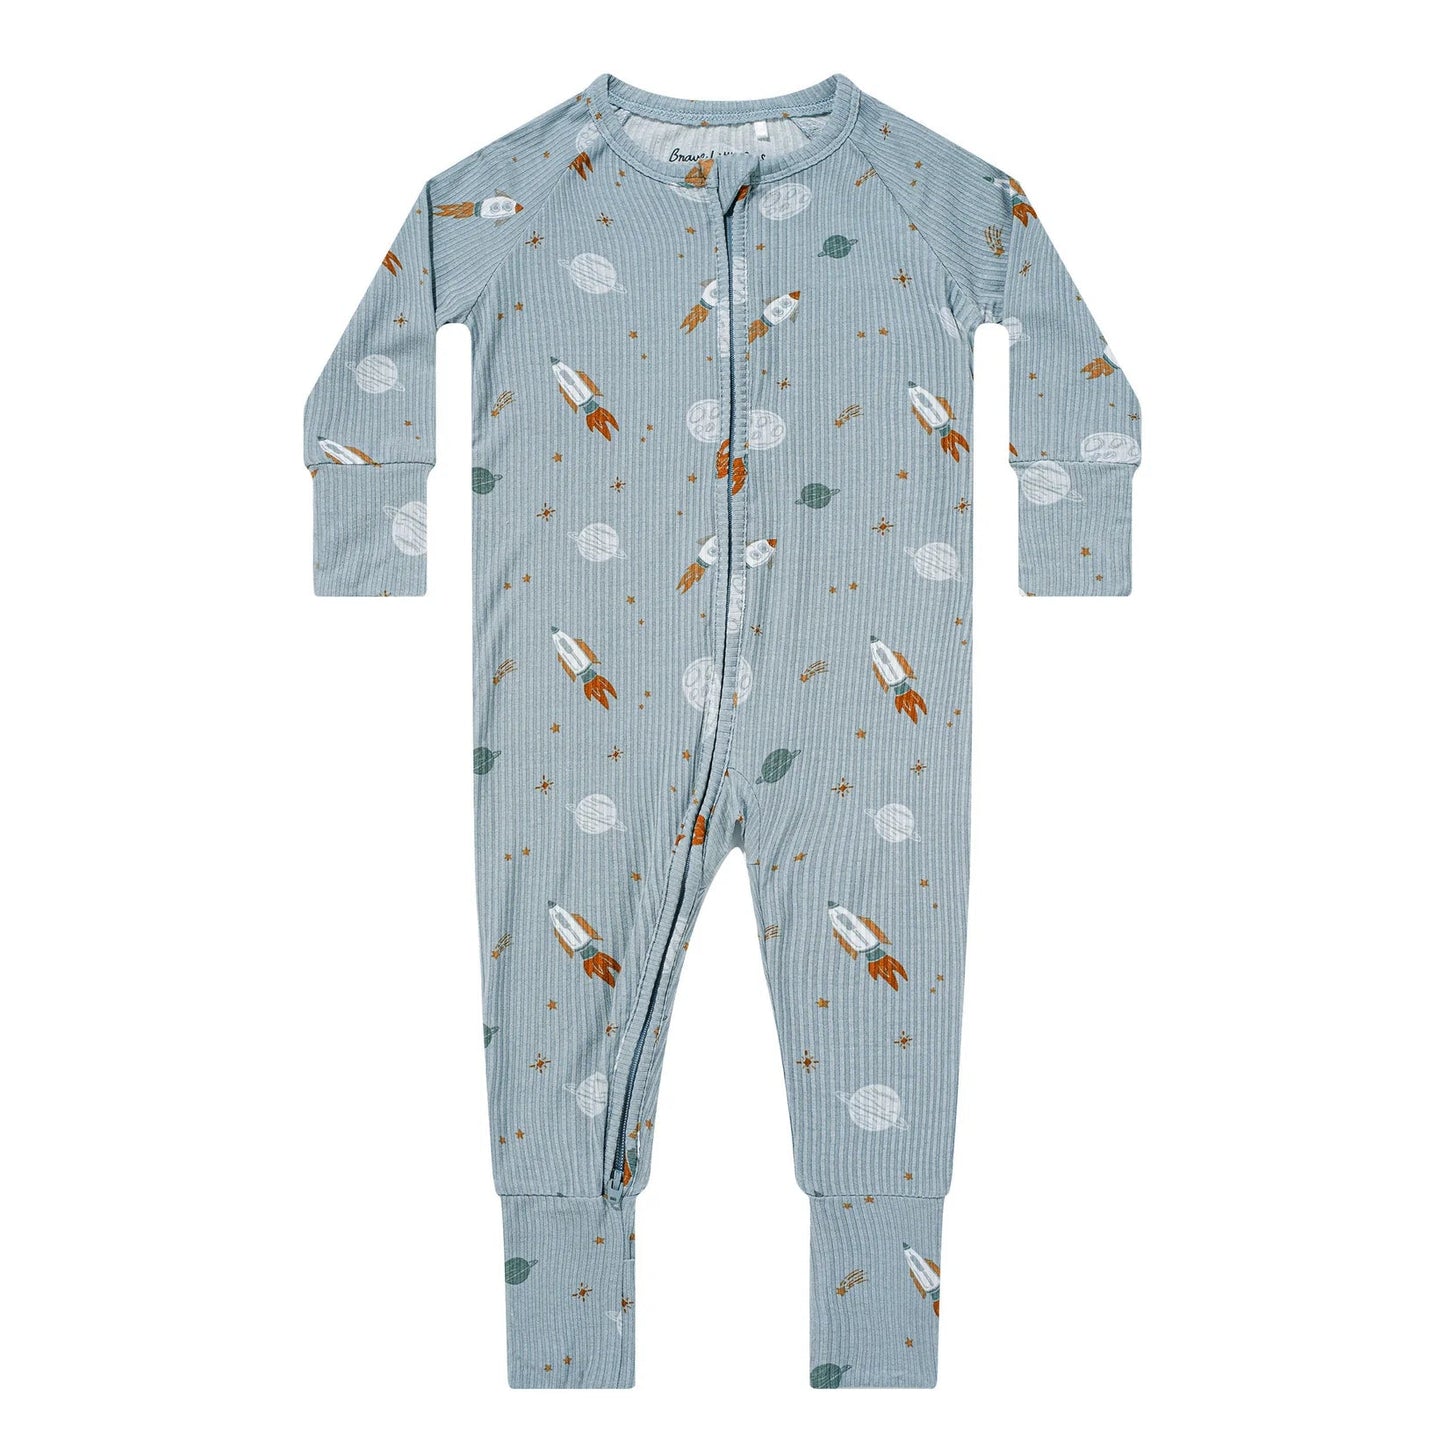 Space Explorer Ribbed Romper 130 BABY BOYS/NEUTRAL APPAREL Brave Little Ones 0-3m 